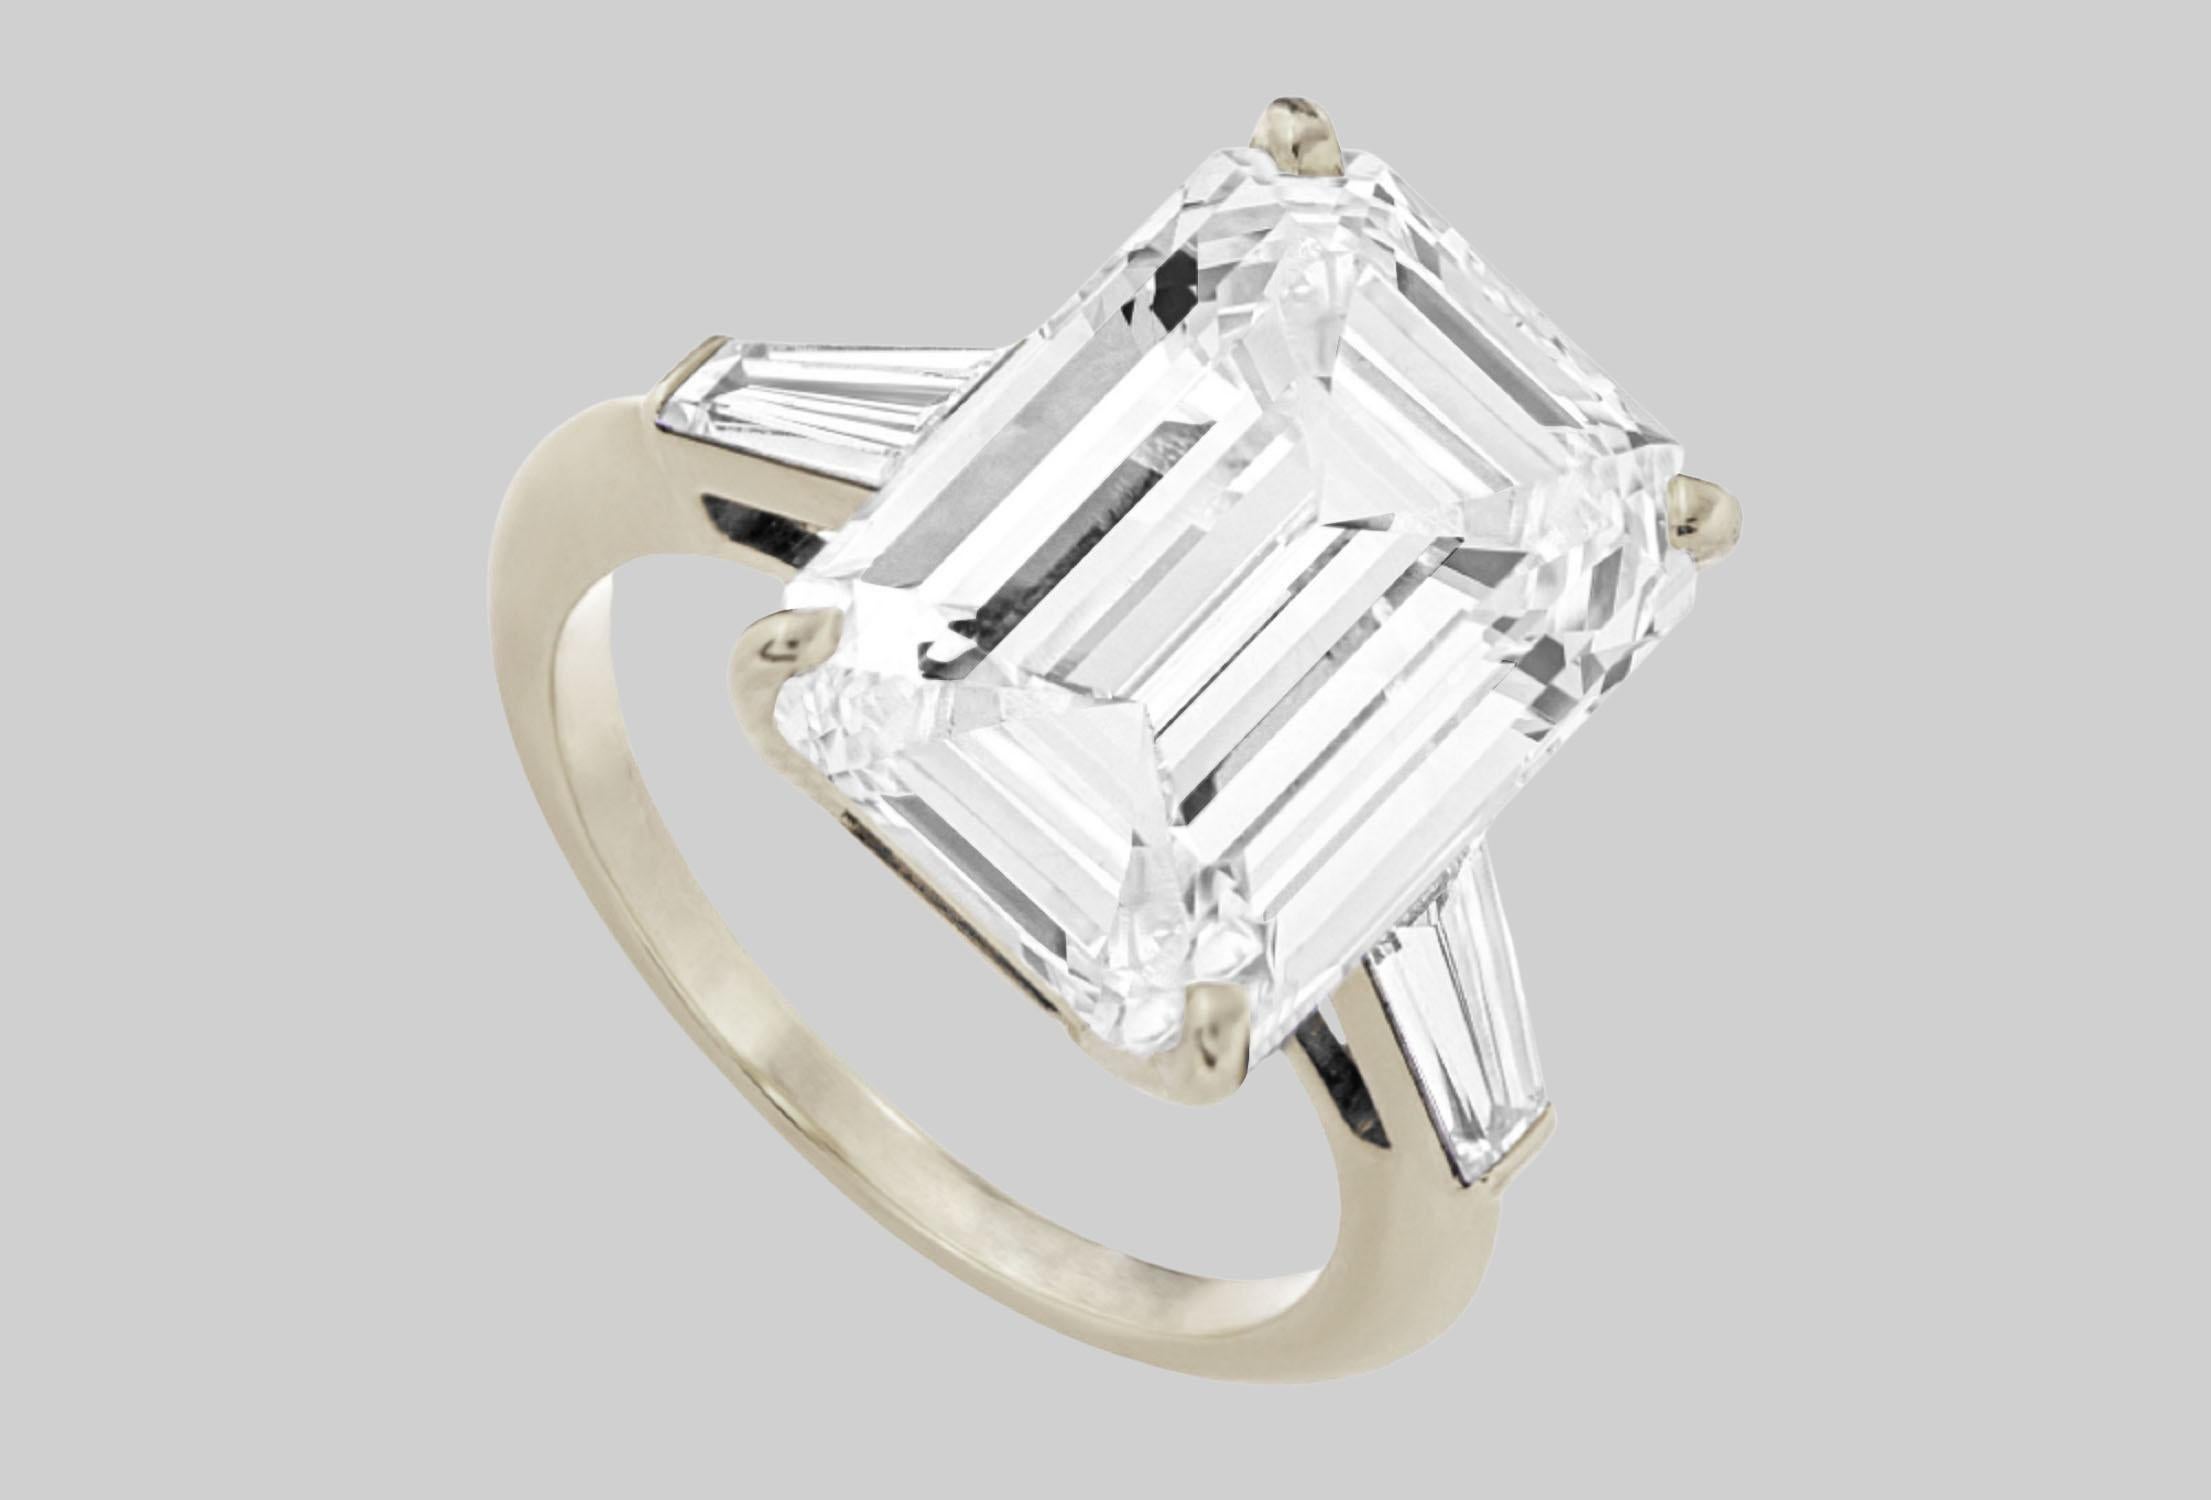 An exquisite 10 carat emerald cut diamond certified by GIA 
The clarity is flawless
the color is D
the symmetry and polish are both excellent 
the stone presents no fluorescence 